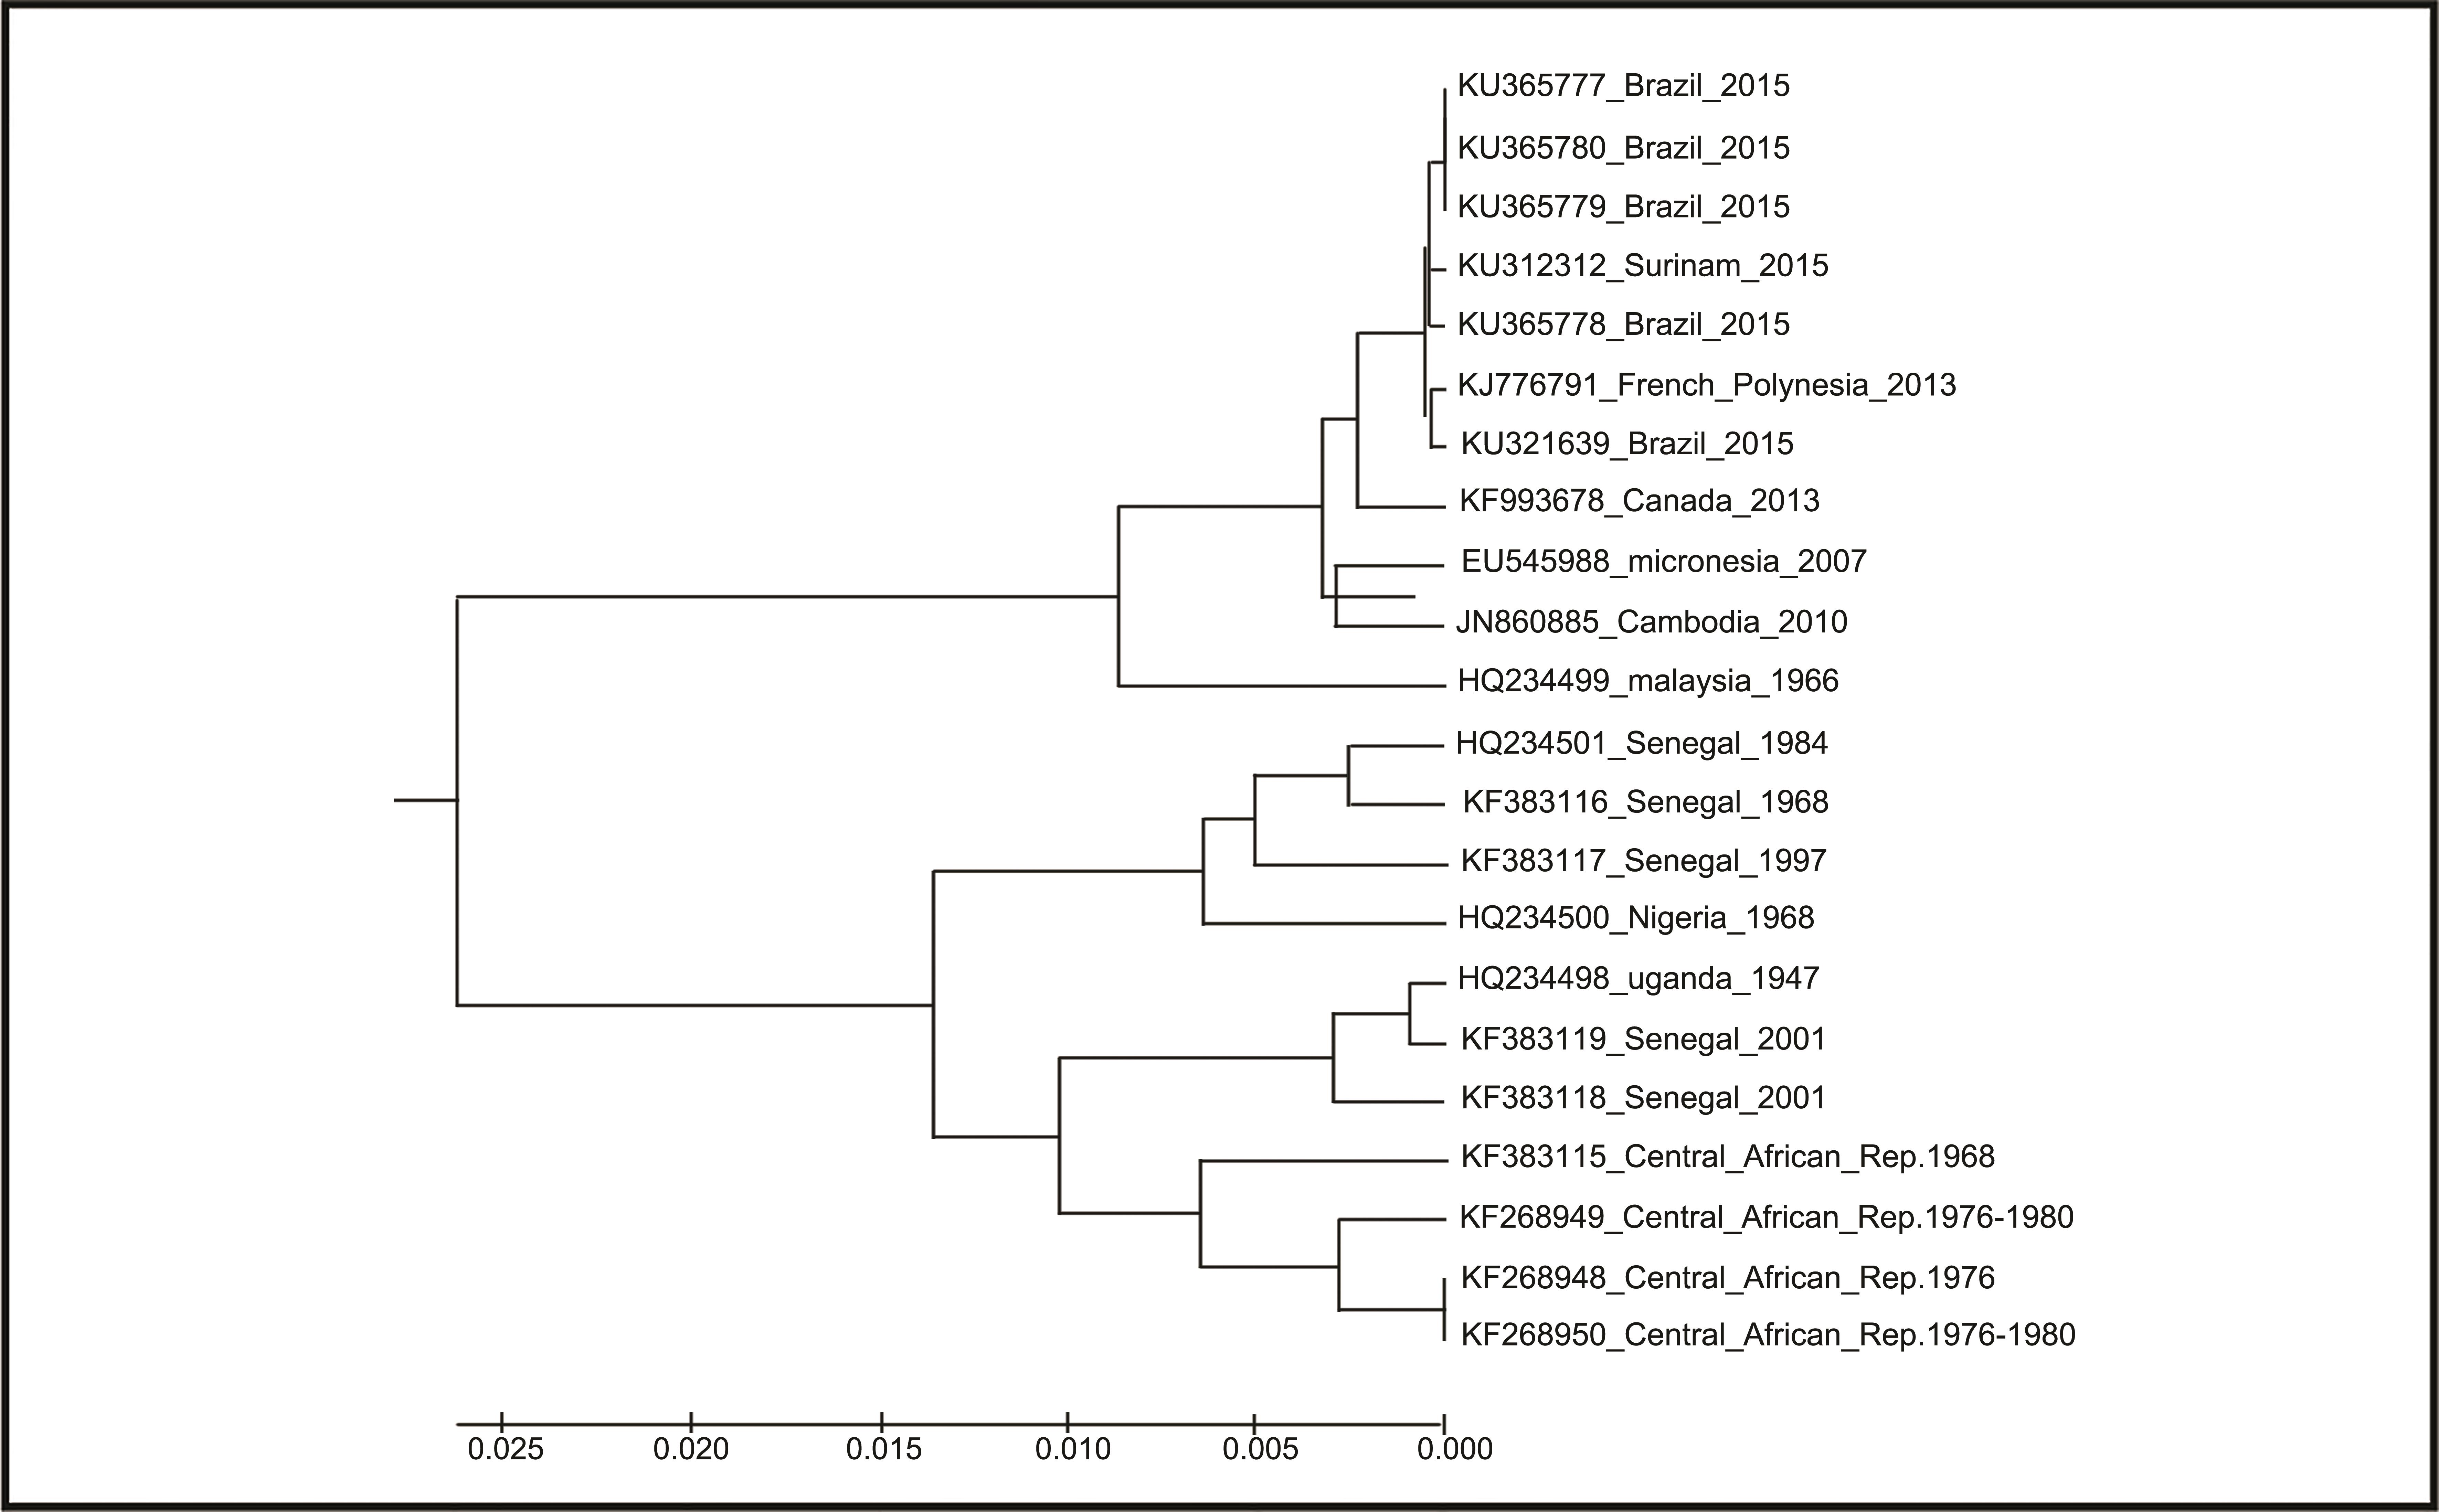 Phylogenetic tree of 22 ZIKV genome sequences.